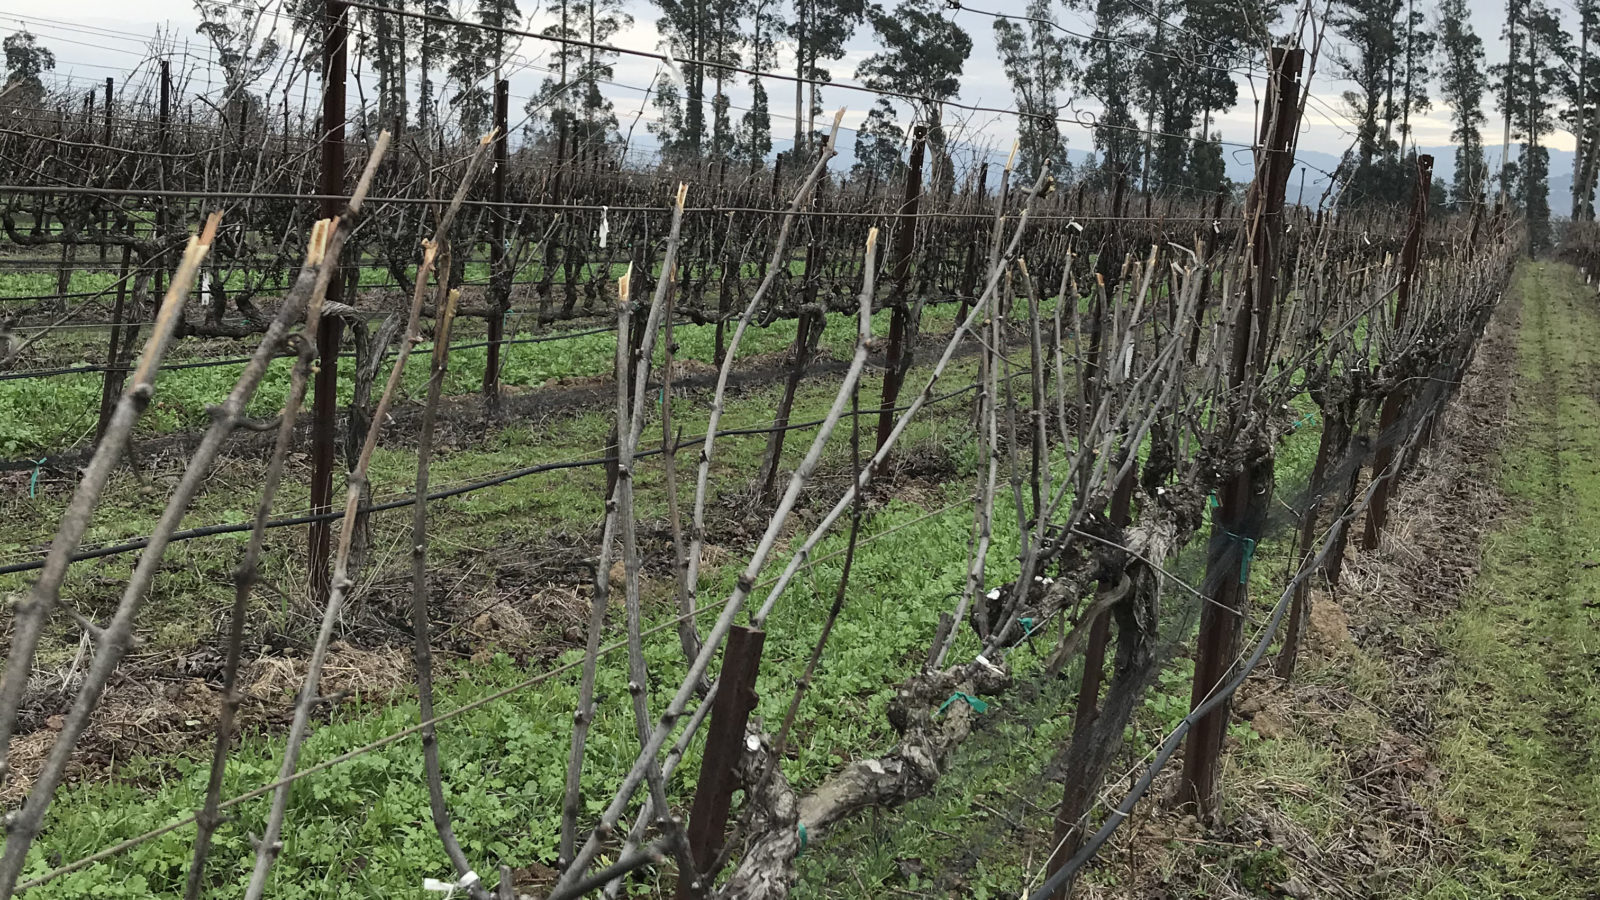 view of grapevines in january